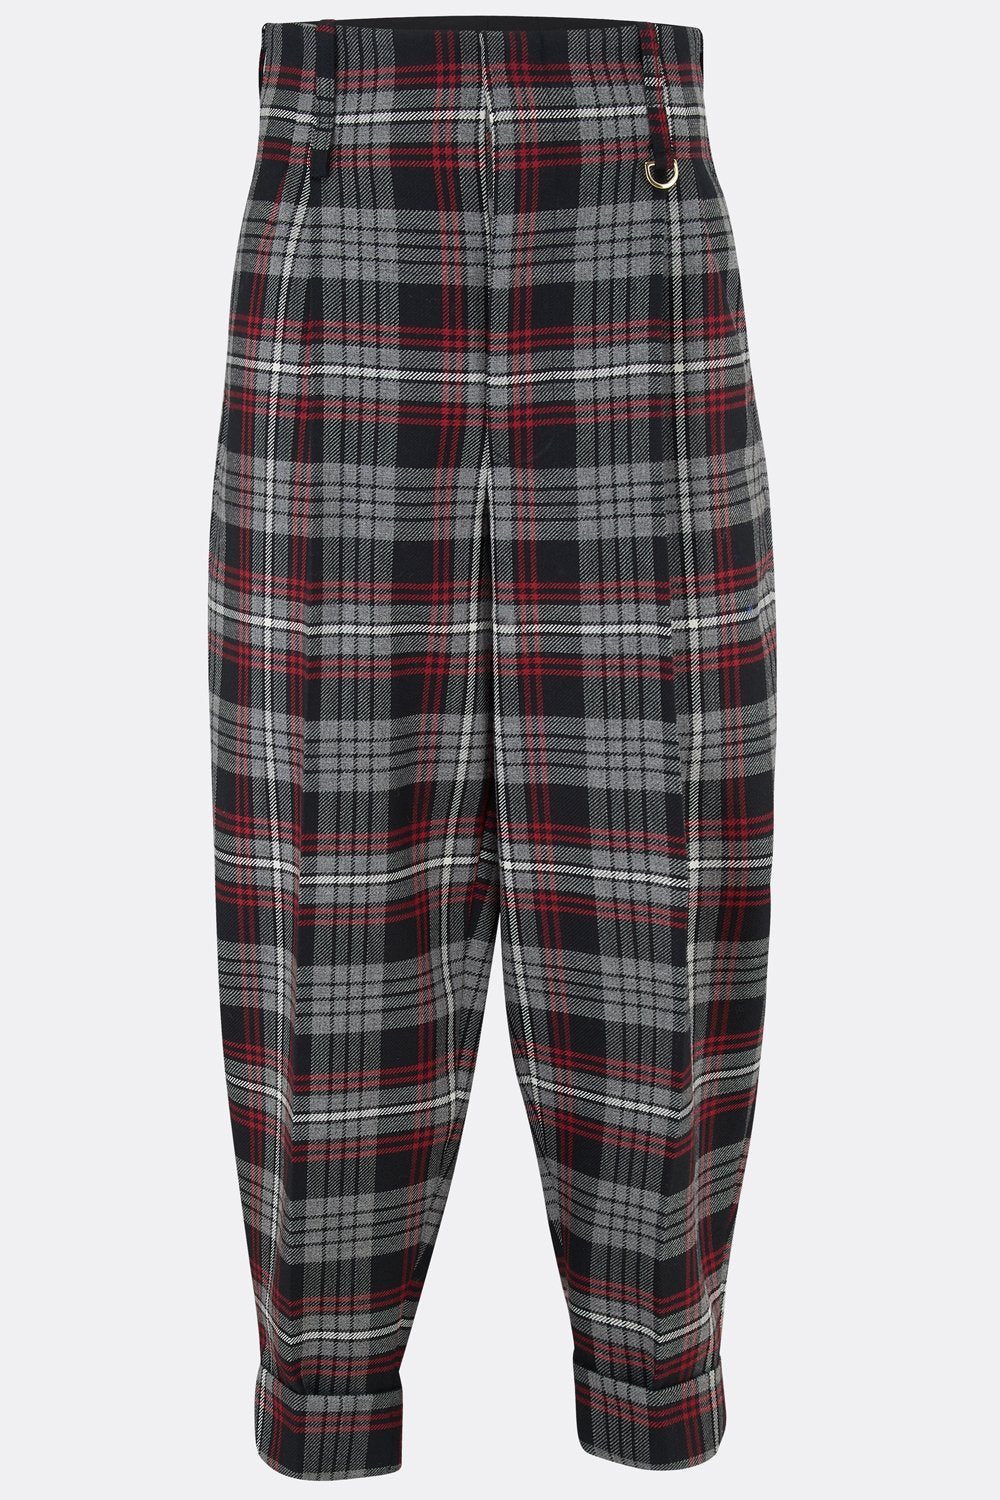 DILLINGER TROUSERS IN AULD LANG SYNE TARTAN (made to order)-menswear-A Child Of The Jago